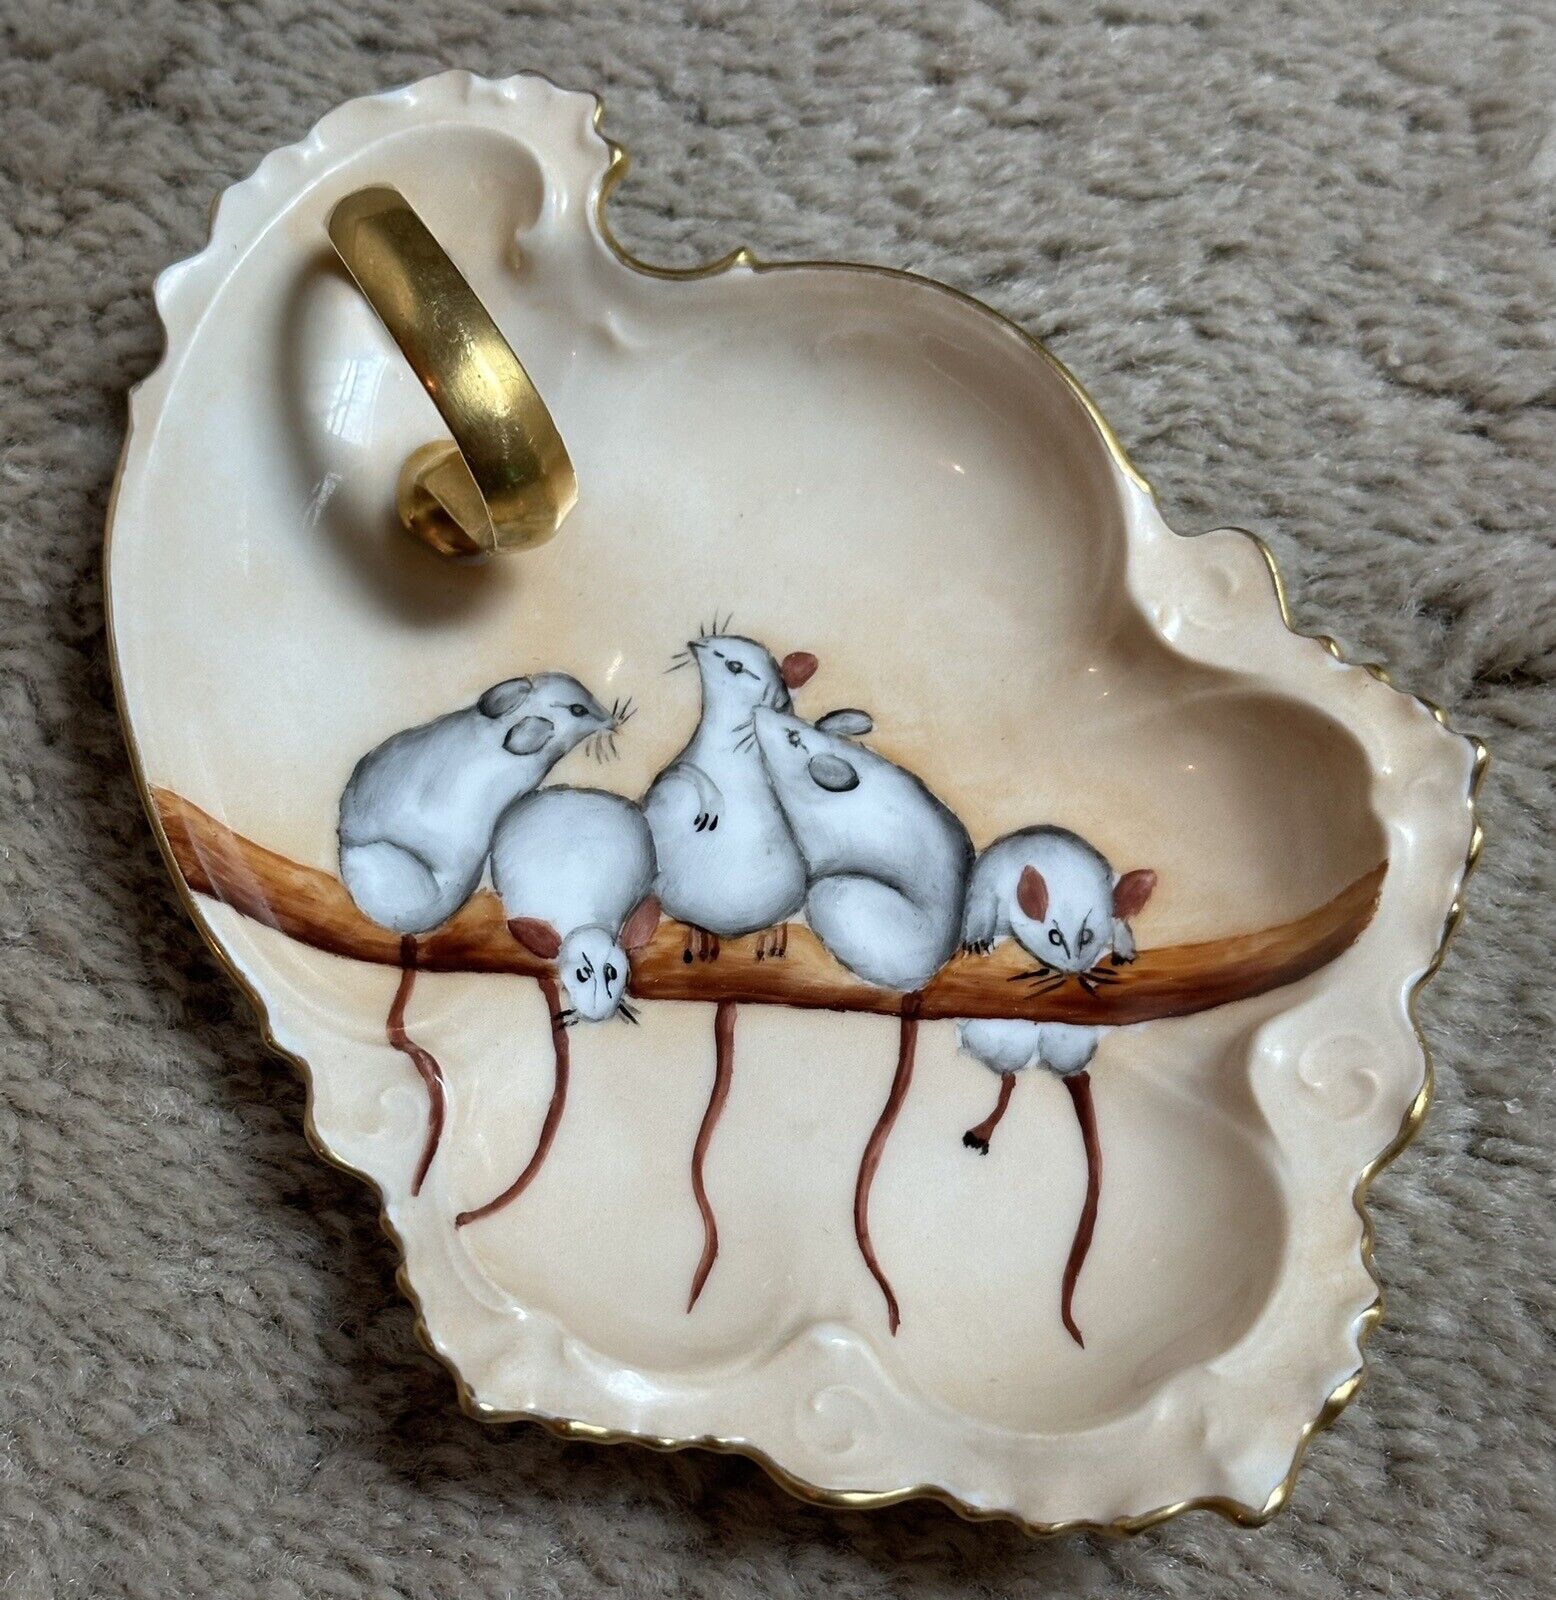 Antique Vintage Porcelain Nut Candy Vanity Dish Hand Painted Mice, Signed